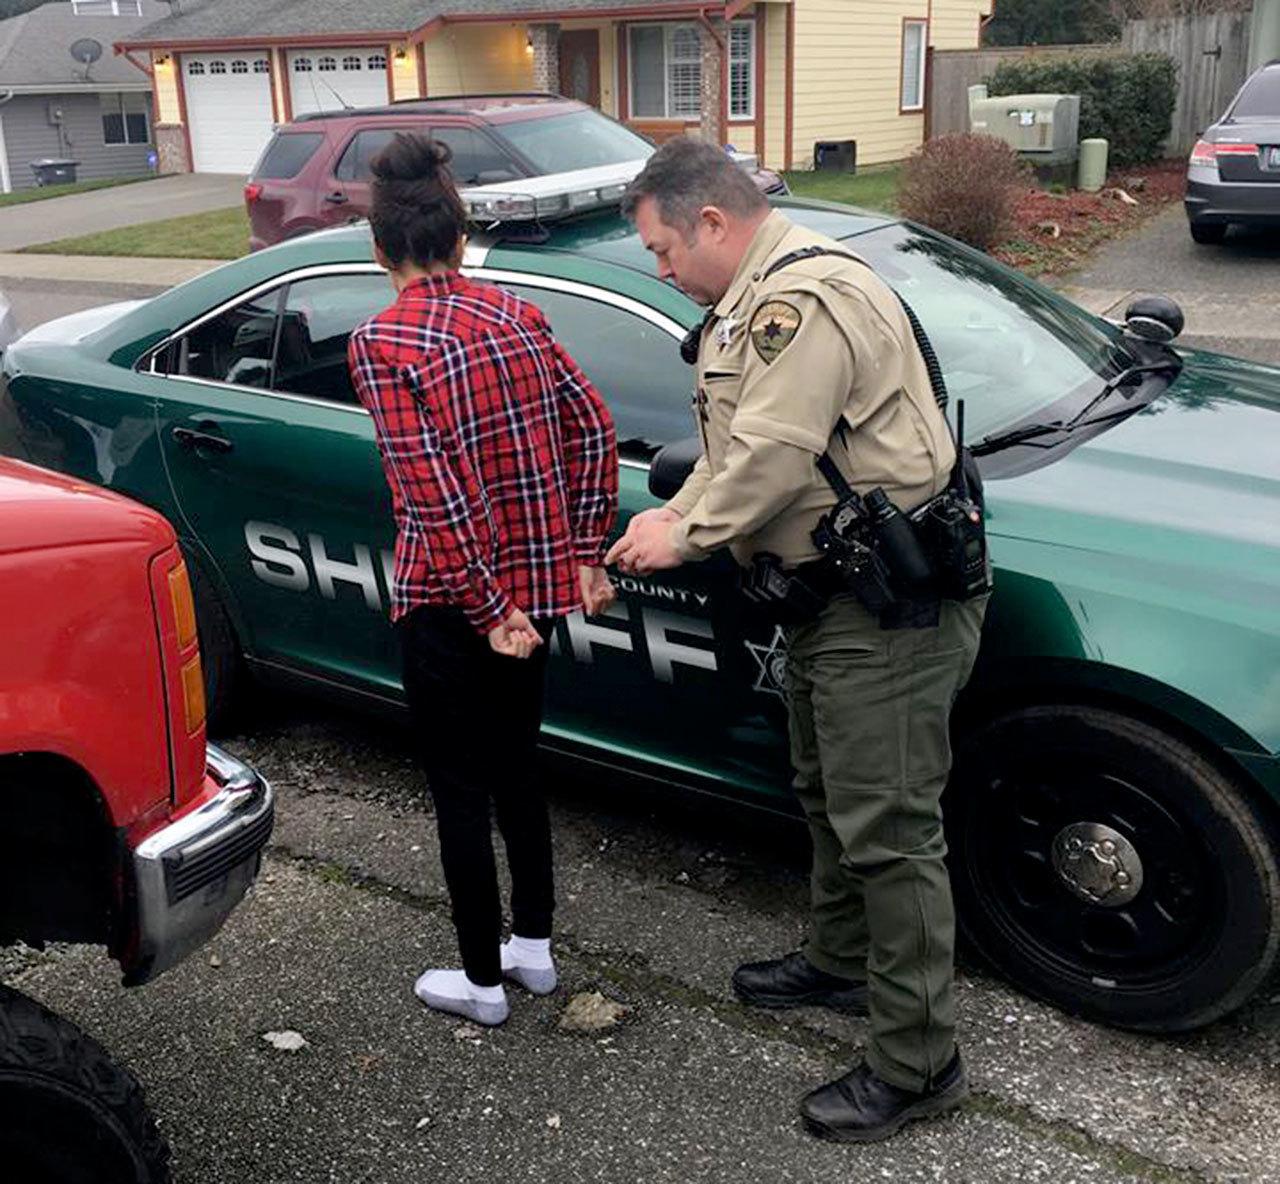 A 23-year-old Silverdale man was arrested Feb. 21 on suspicion of first-degree murder in the death of a man found on a Seabeck road over the weekend, the Kitsap County Sheriff’s Department announced on social media. A 20-year-old Kingston woman was arrested and booked on suspicion on first-degree rendering assistance. (Kitsap County Sheriff’s Department/Courtesy)